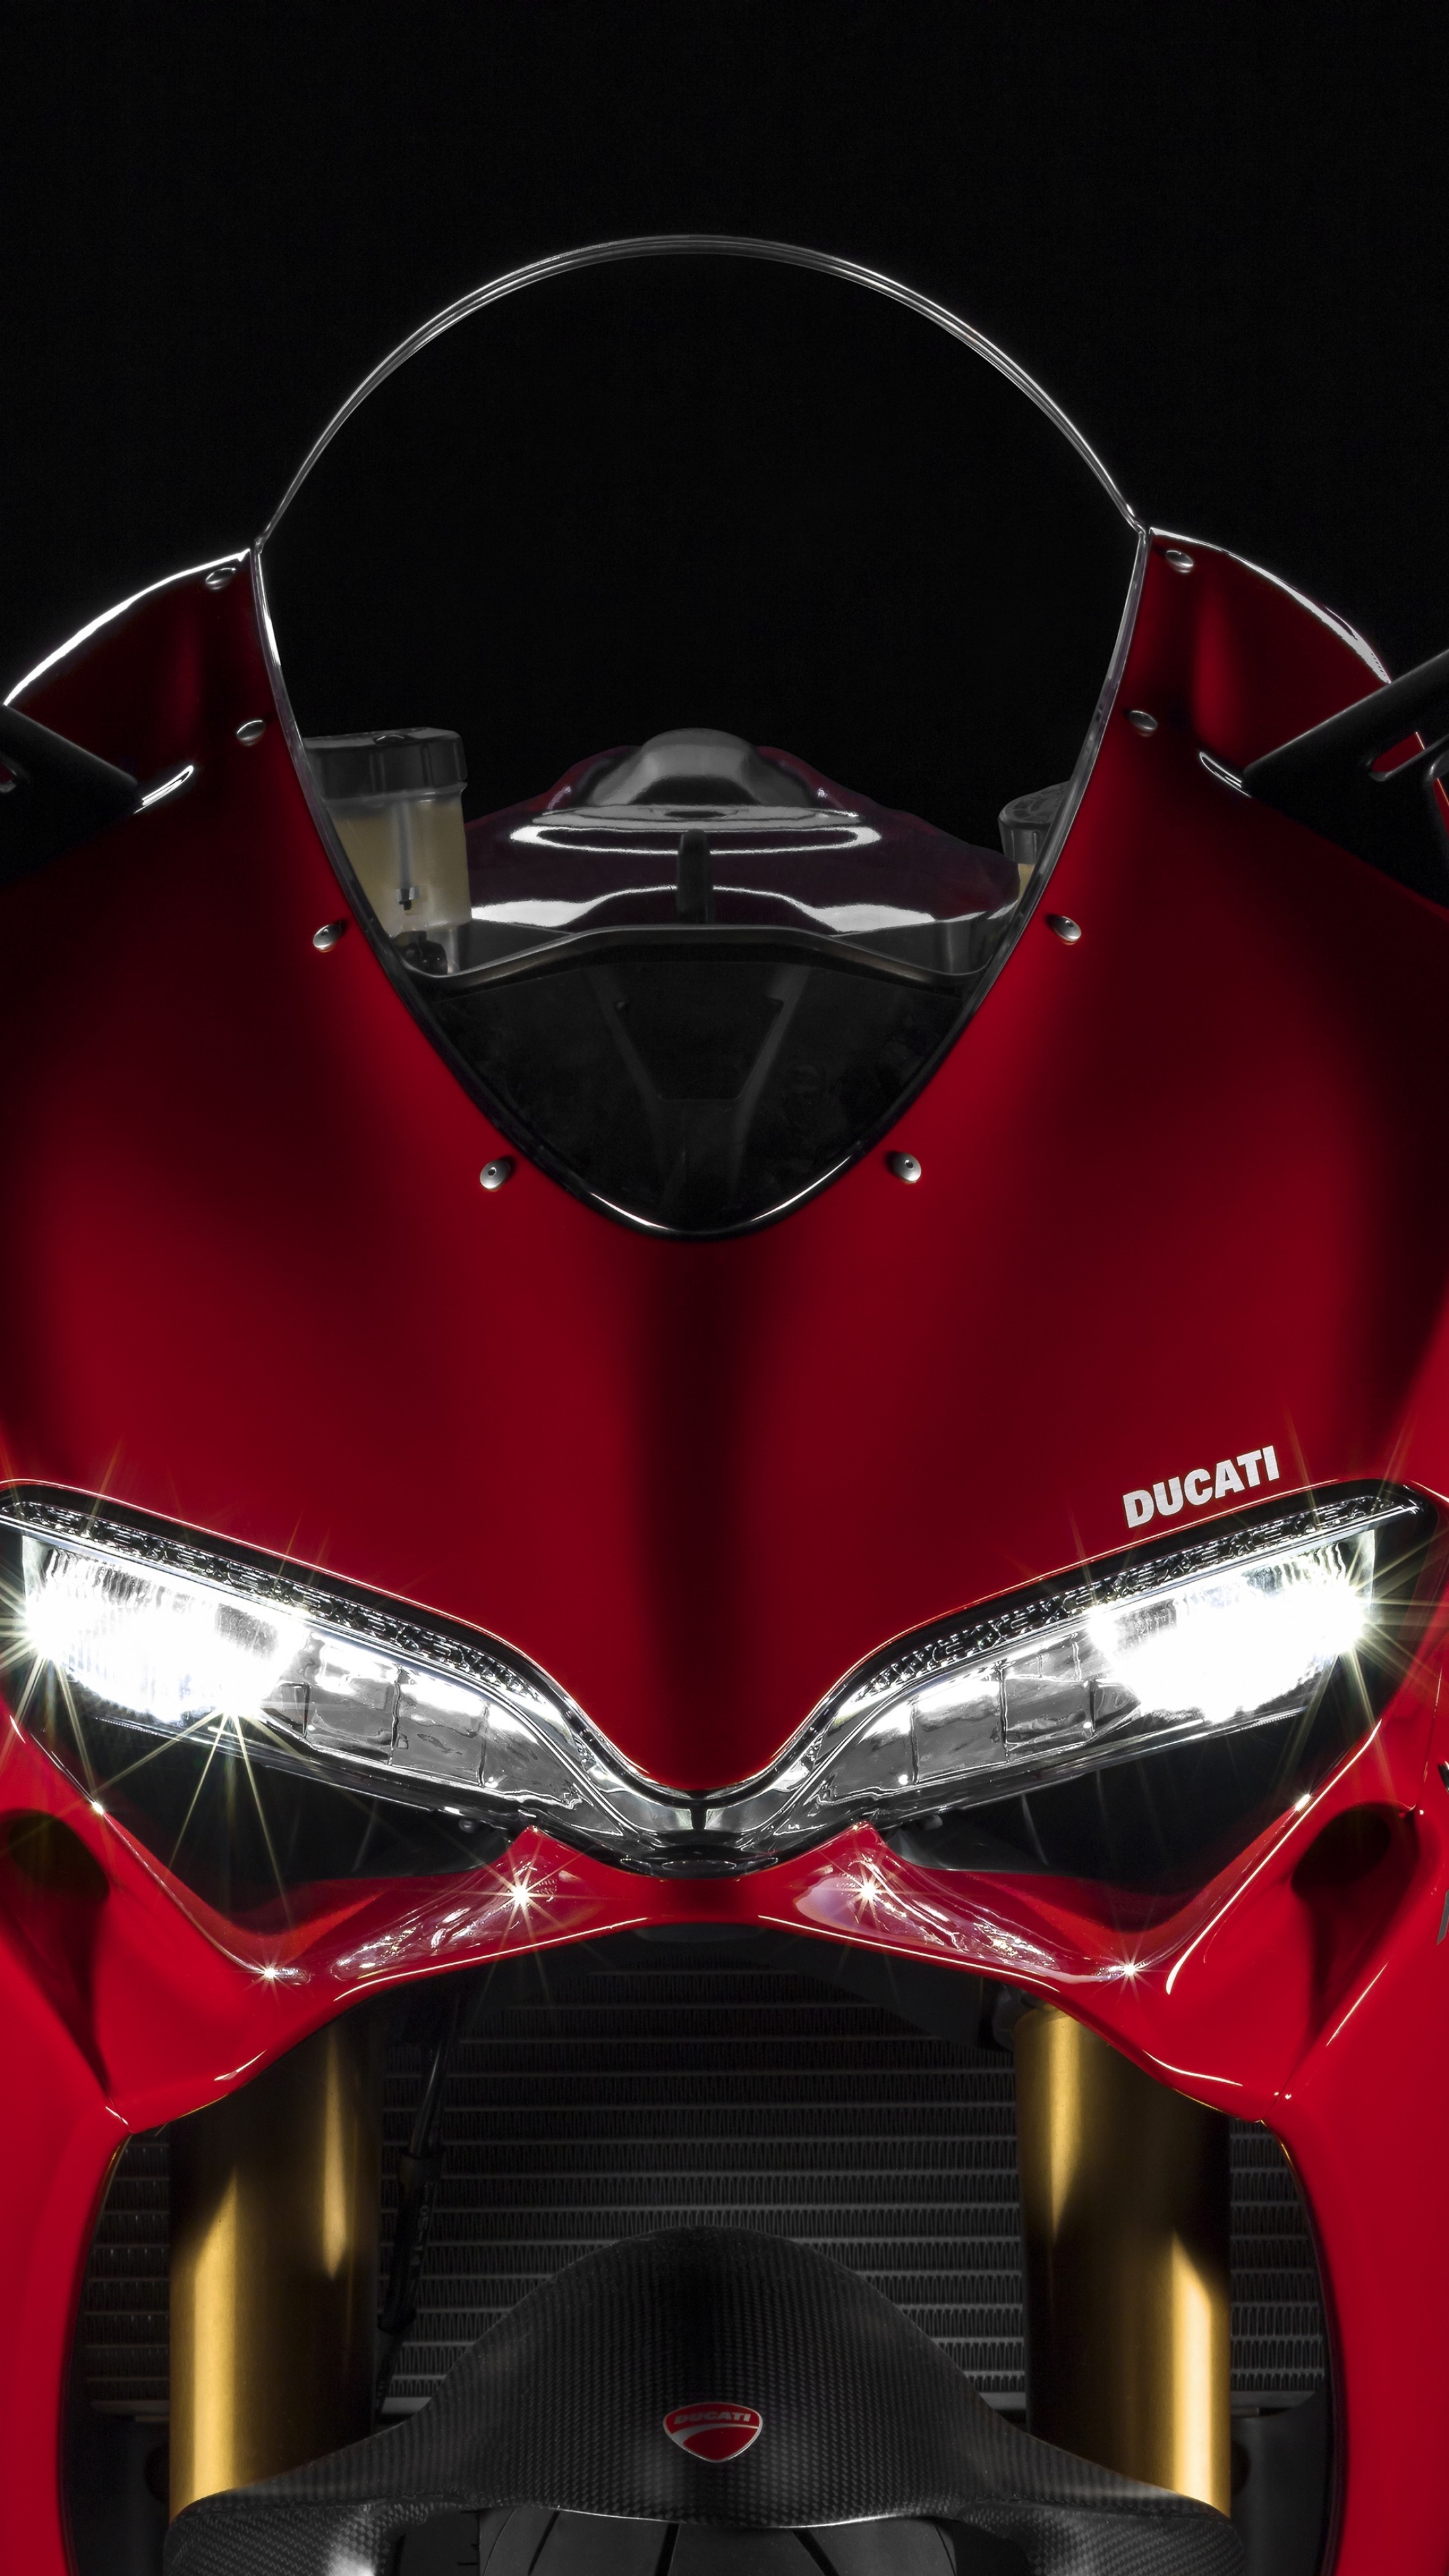 Superbike: The Ducati 1299 Panigale, A motorcycle designed and optimized for speed, acceleration, braking, and cornering. 2160x3840 4K Wallpaper.